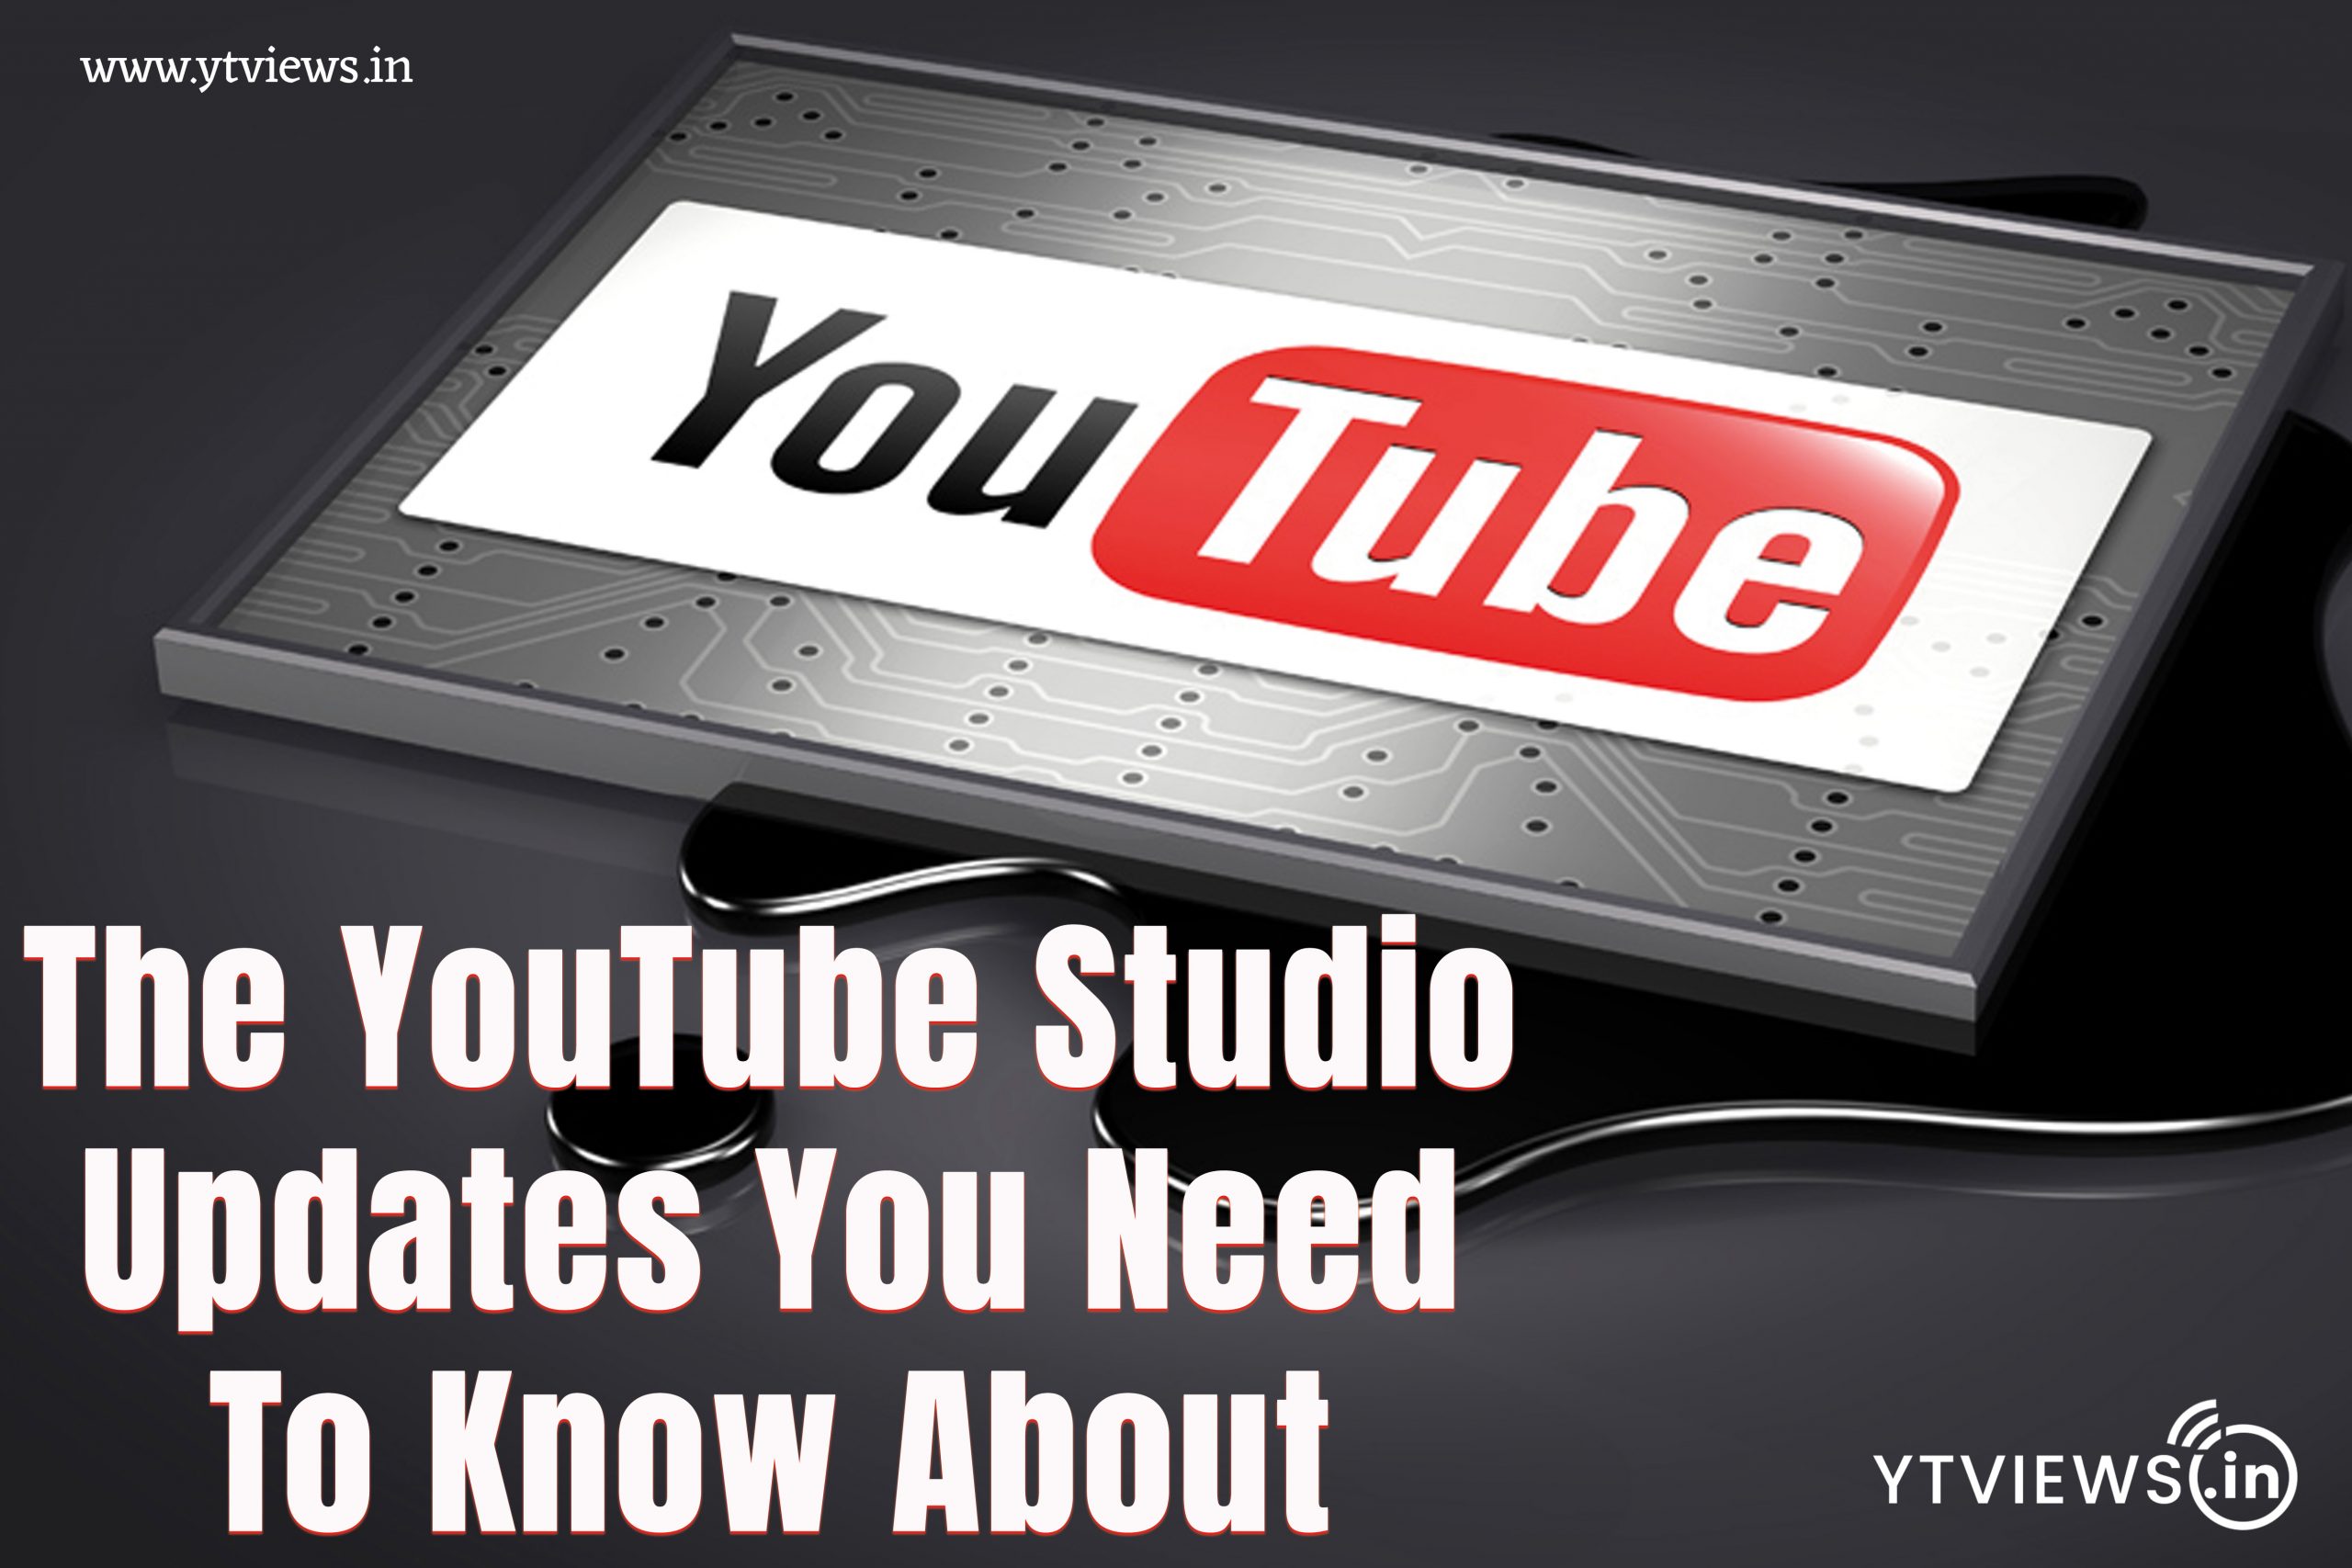 The YouTube Studio Updates You Need To Know About